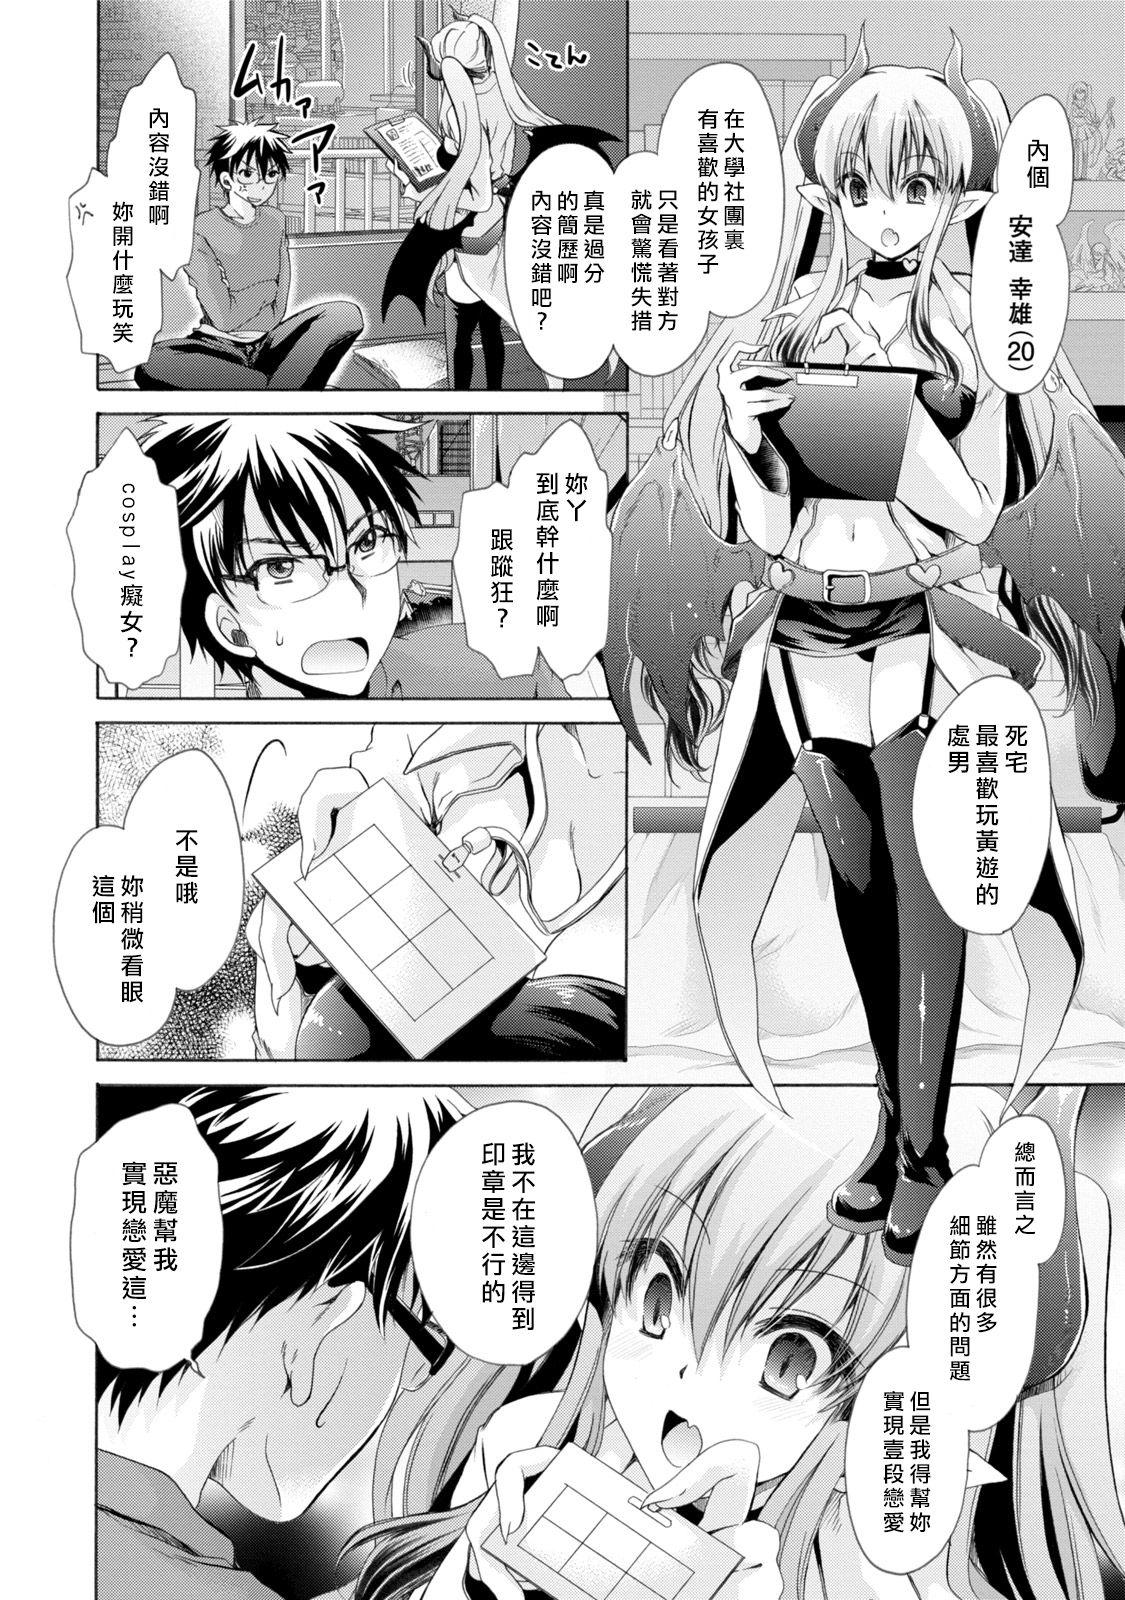 Old And Young Ore to Kanojo to Owaru Sekai - World's end LoveStory 1 Blacksonboys - Page 10